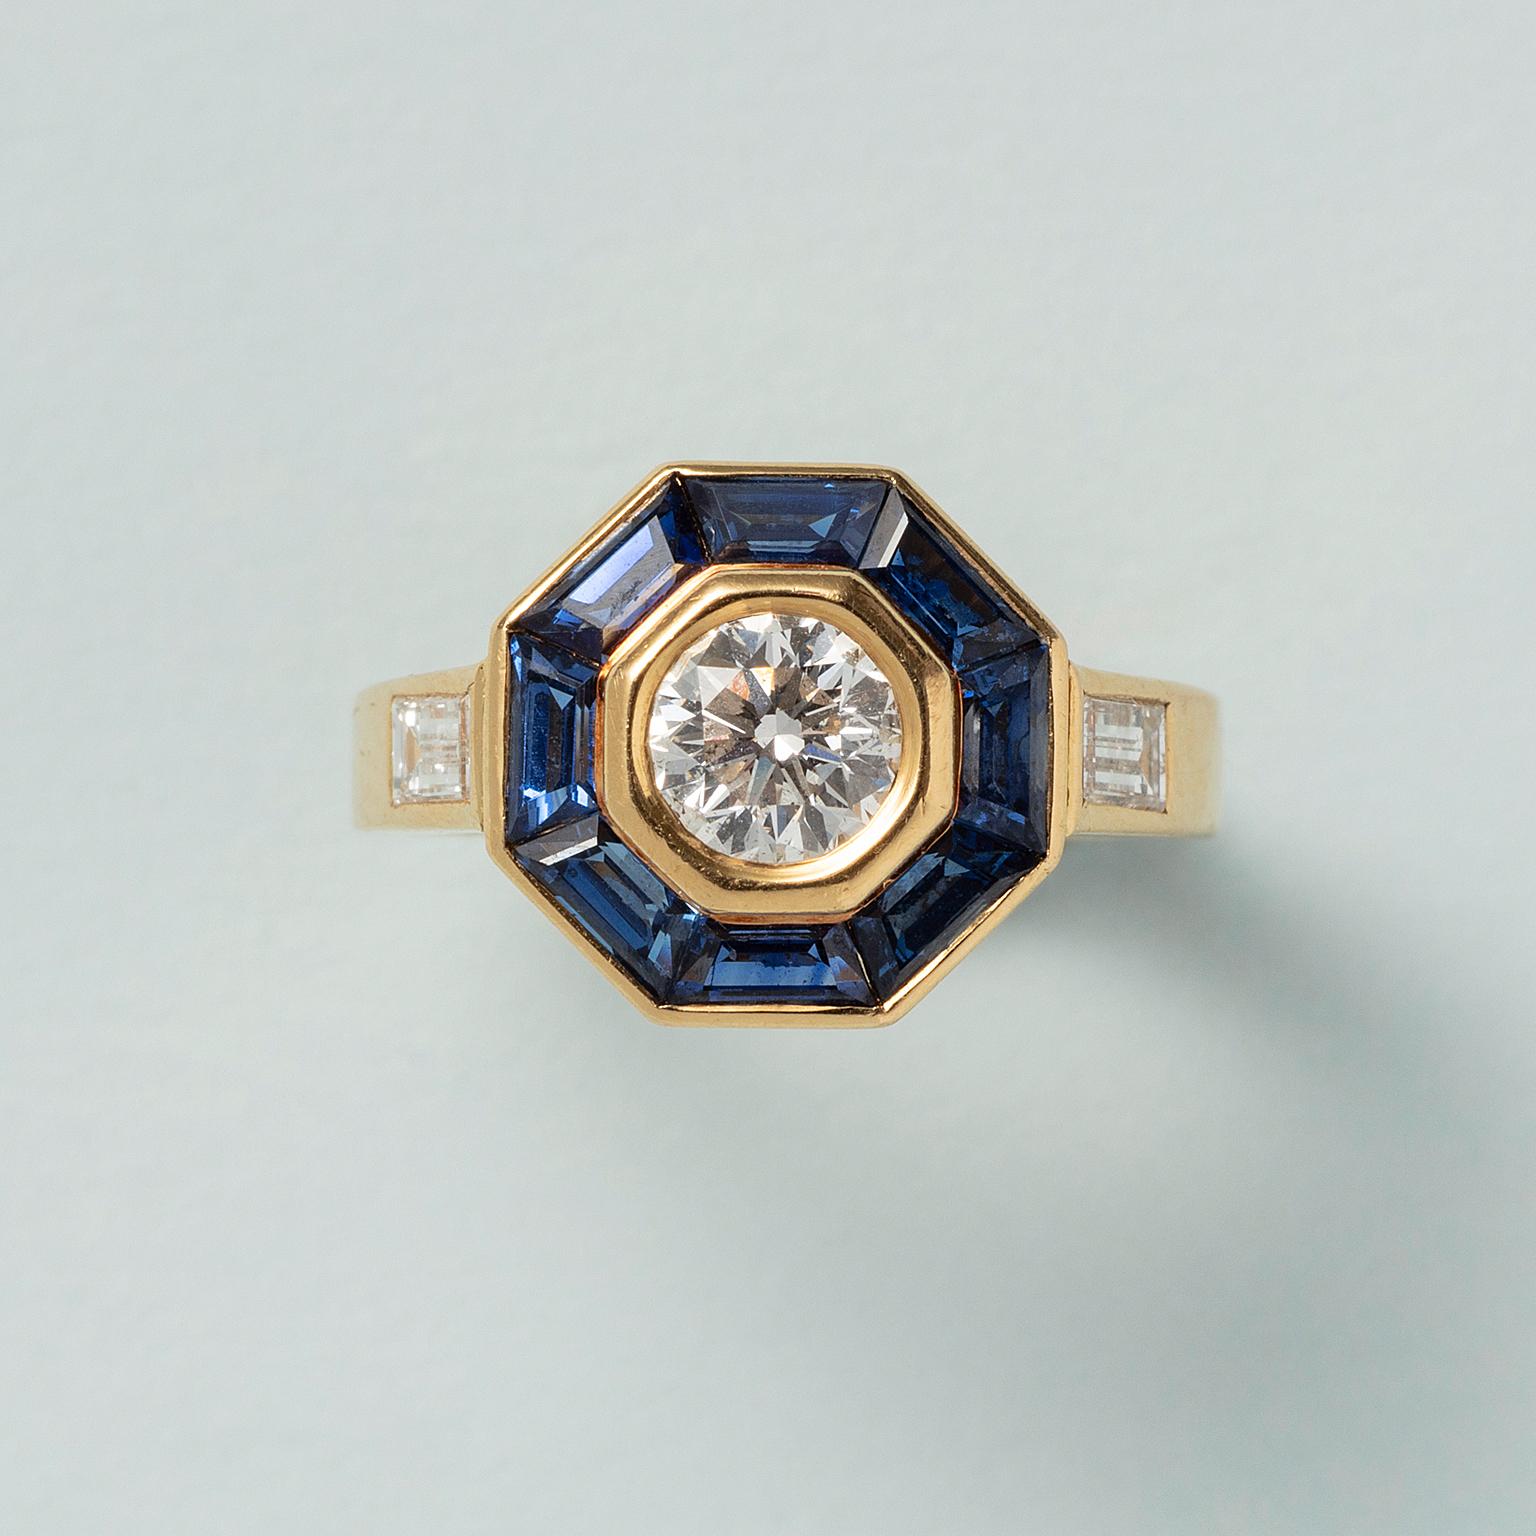 An 18 carat yellow gold ring with an old brilliant cut diamond (0.5 ct, GH-I), with a halo of eight trapezium cut sapphires, signed and numbered: Mellerio, 35357, France.

weight: 4.9 g
size: 15.25 / 4.5 US
dimensions halo: 10 x 10 mm
width shank: 2